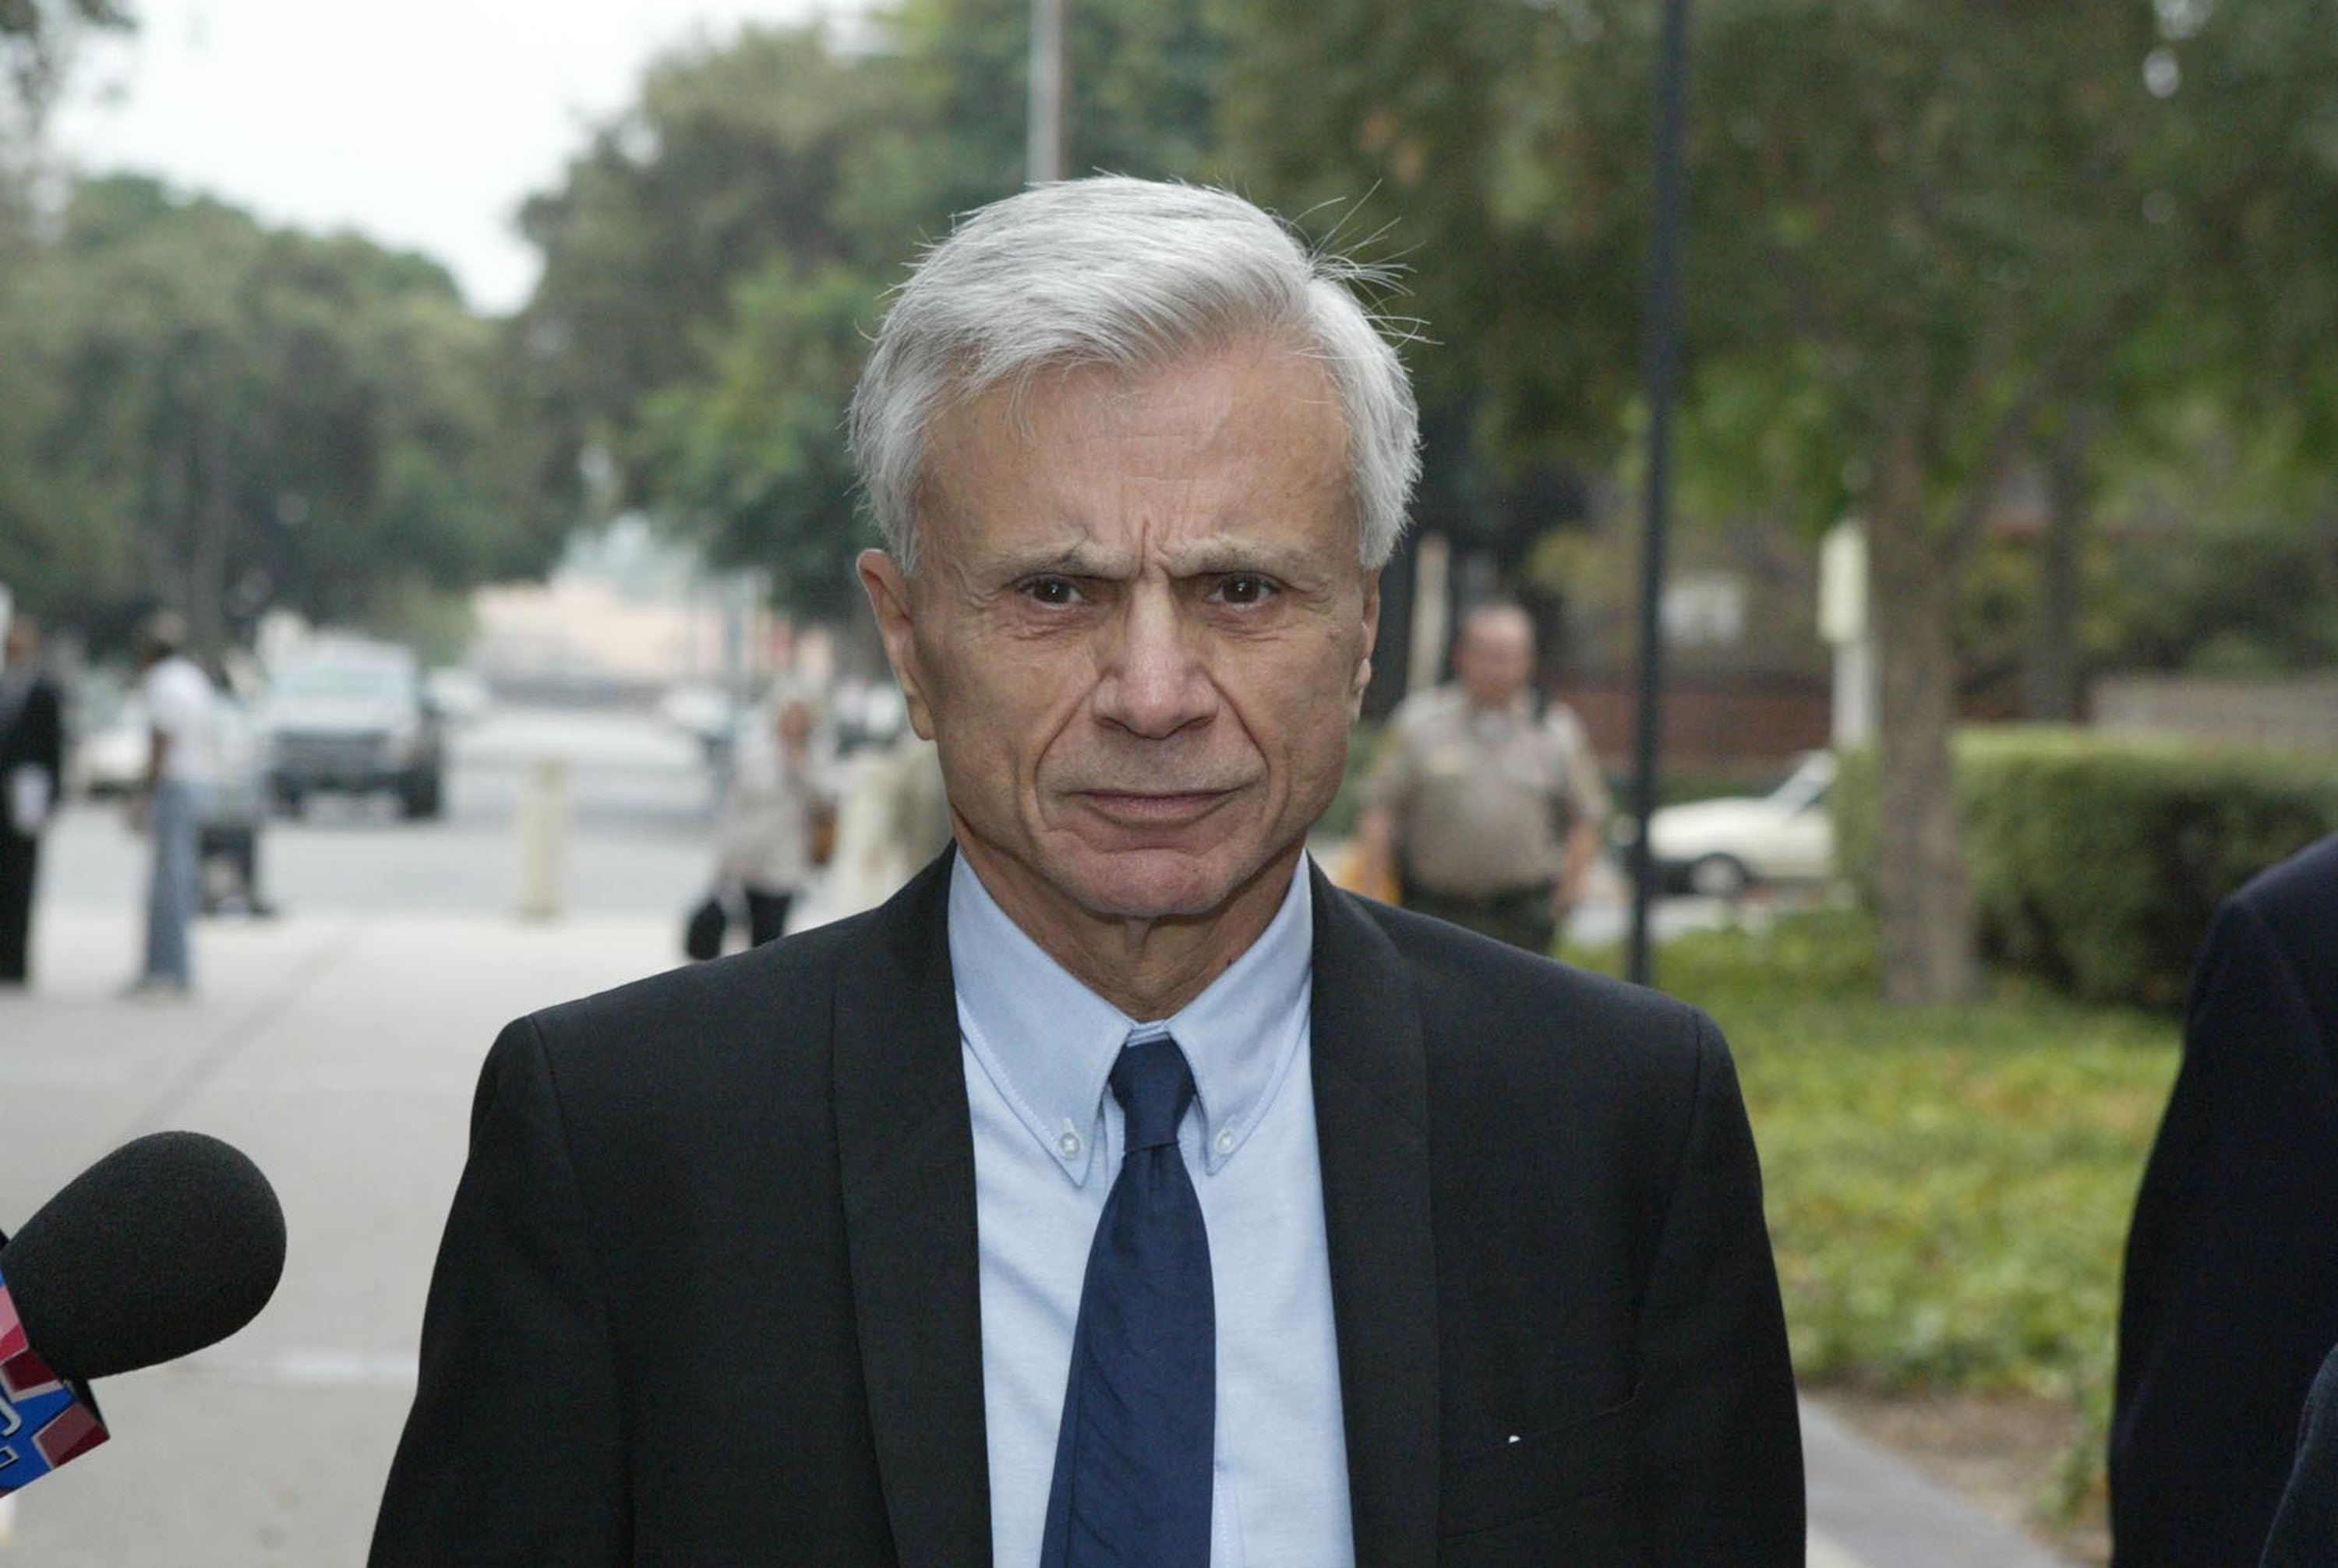  Actor Robert Blake arrives at Van Nuys Municipal court for a pre-trial hearing in his murder case on September 17, 2004 in Van Nuys, California | Source: Getty Images